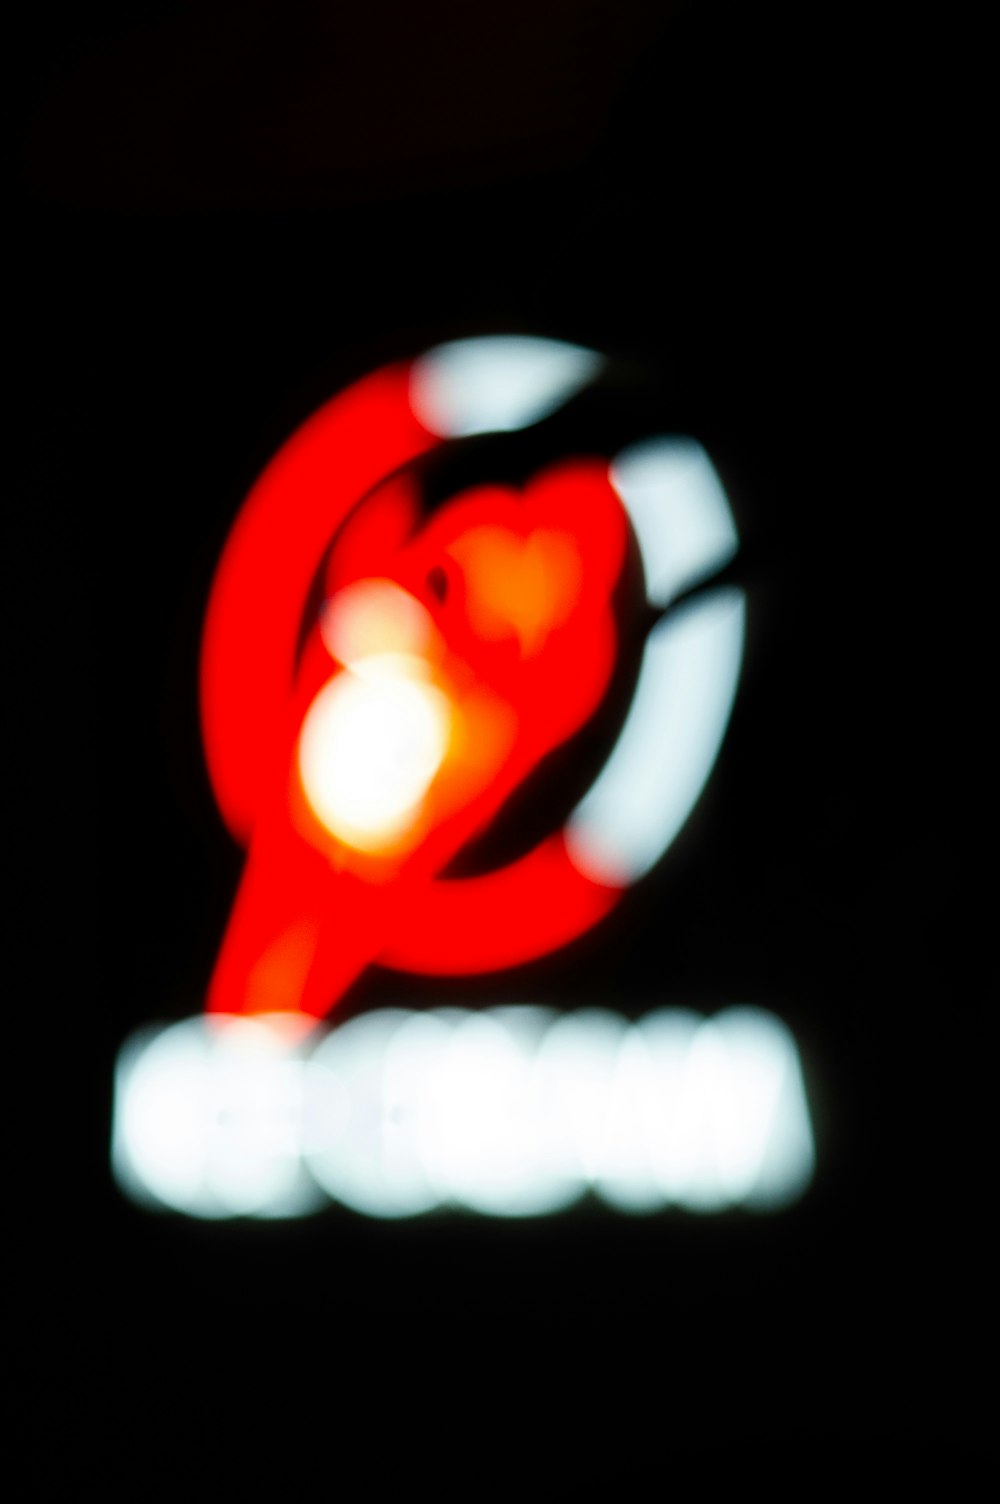 a close up of a red light in the dark